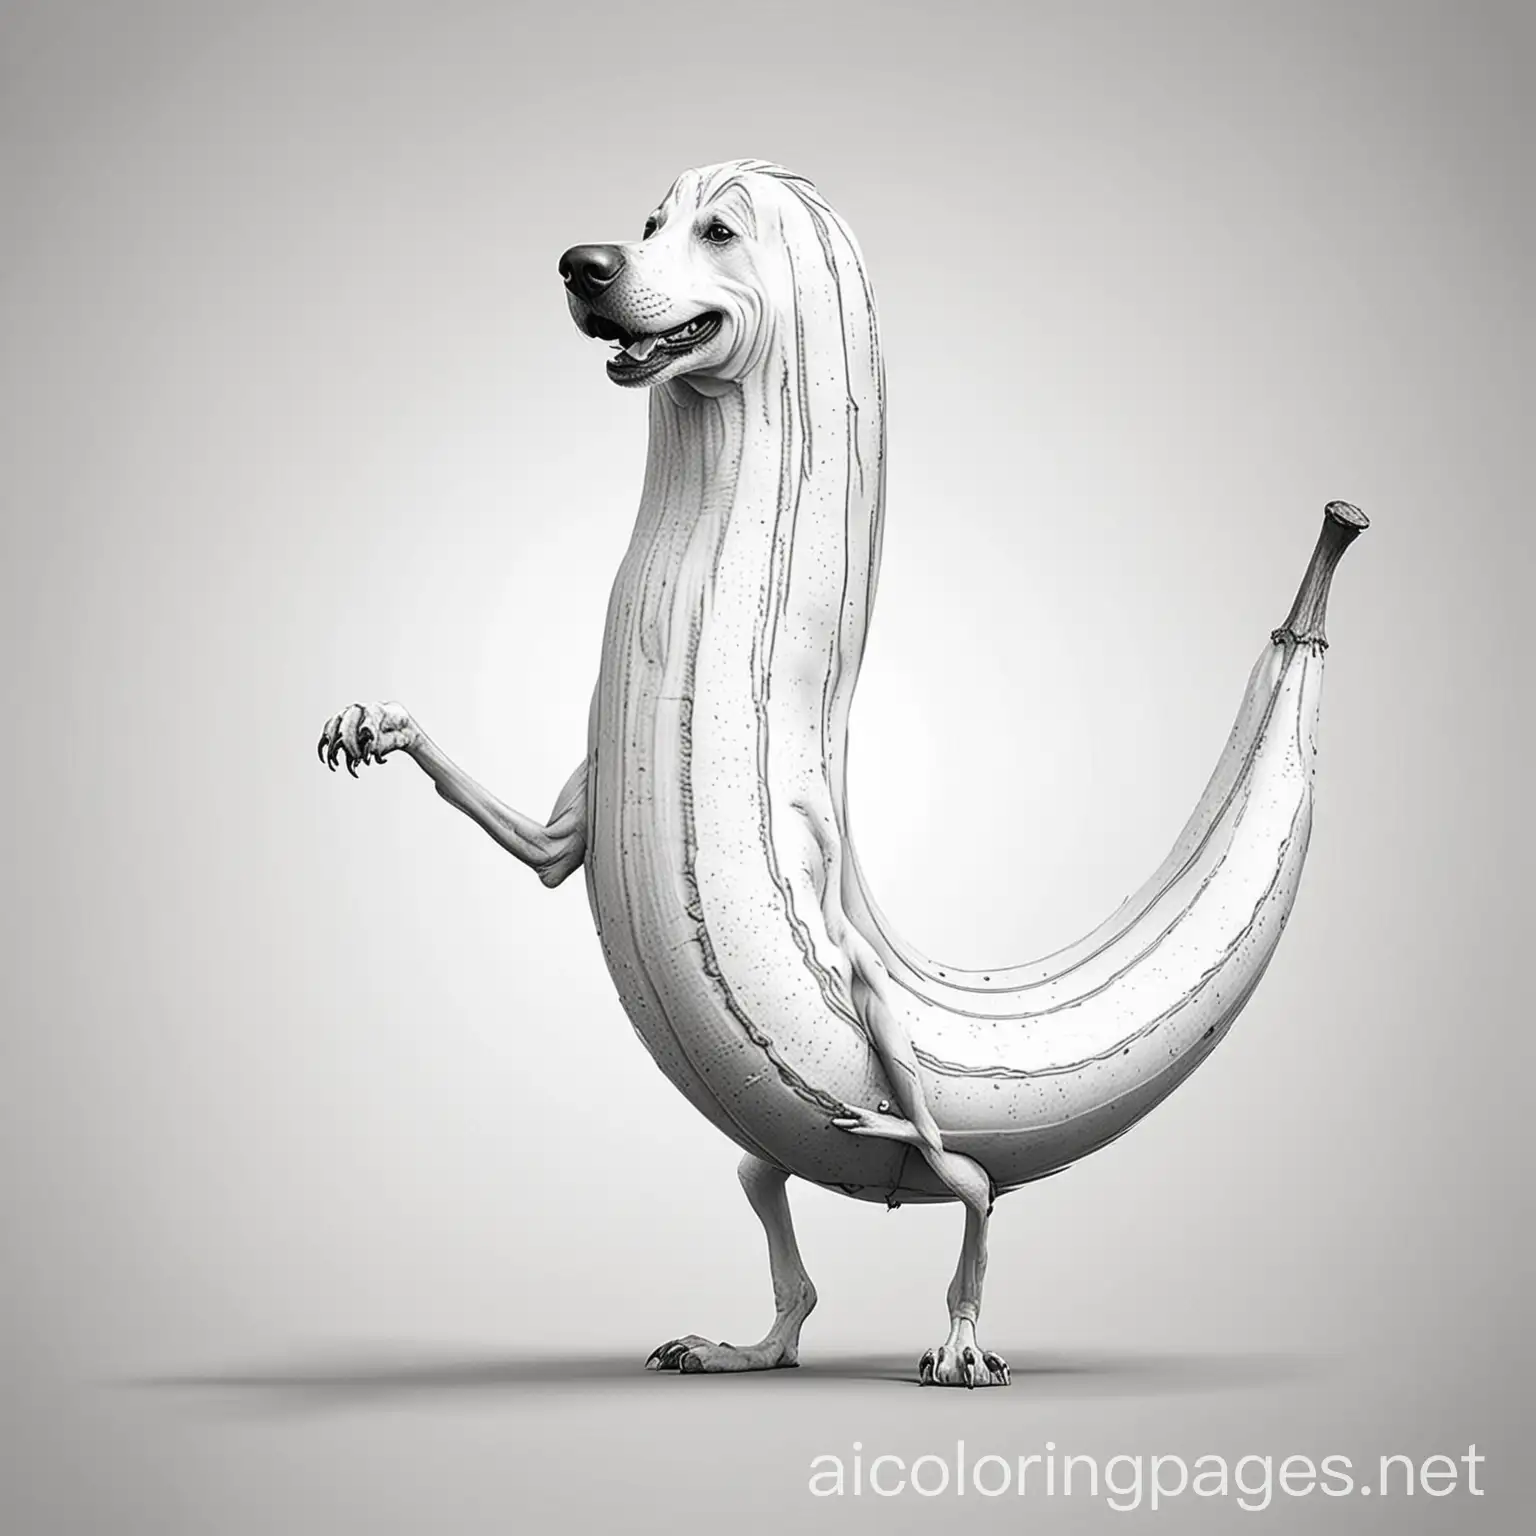 Giant-Mutated-Banana-Dog-Coloring-Page-Simple-Black-and-White-Line-Art-for-Kids